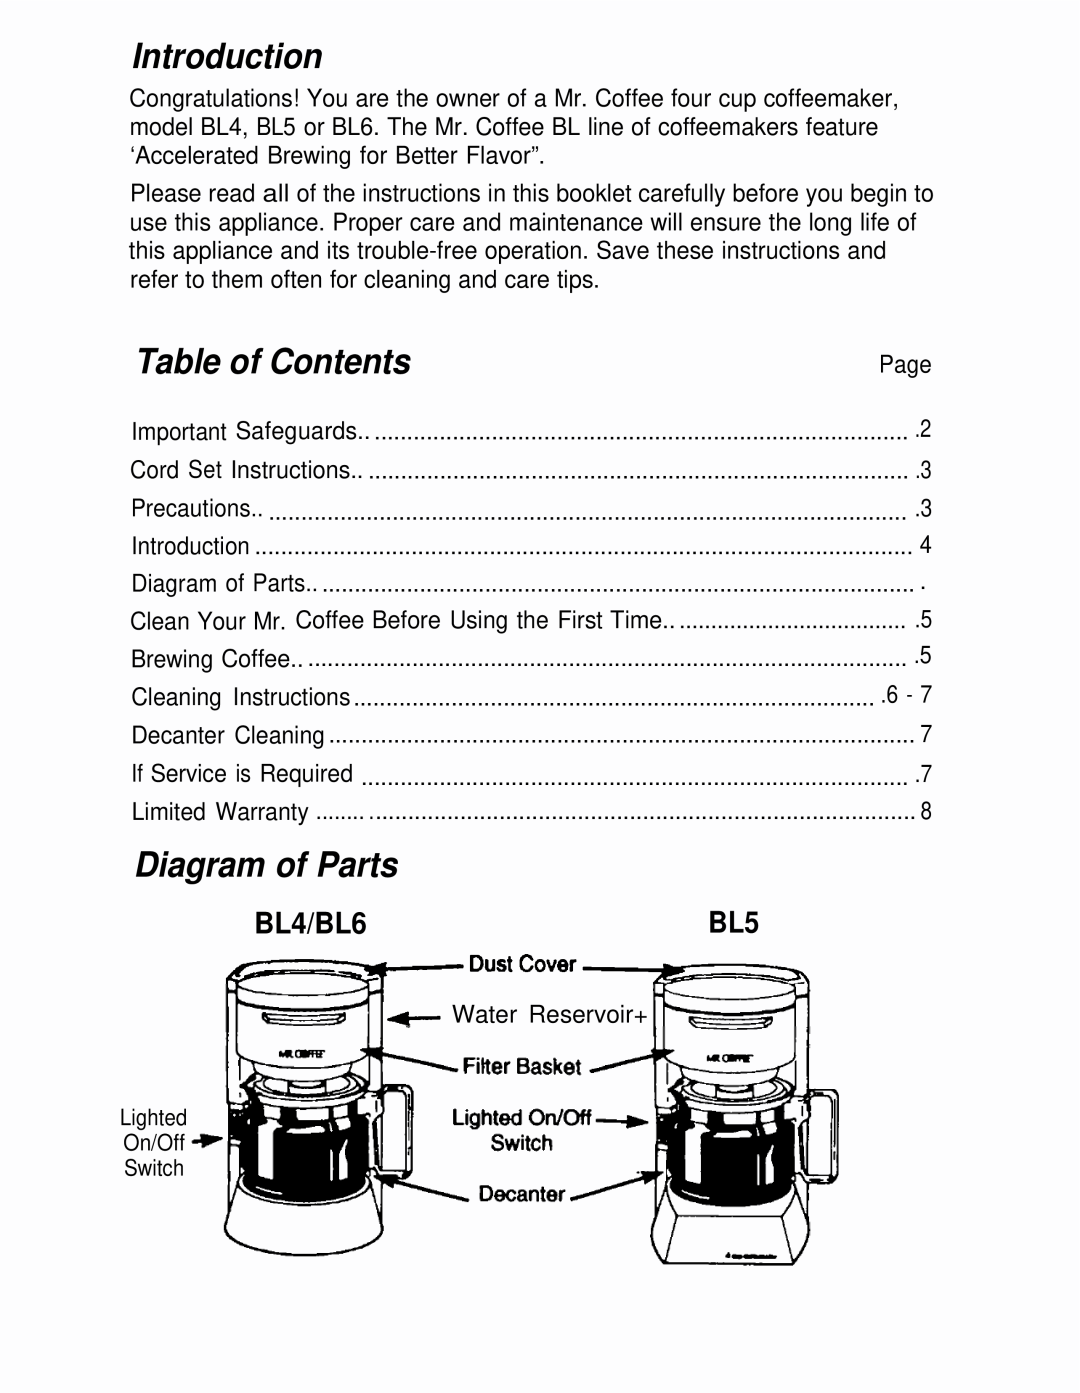 Mr. Coffee BL5, BL6 manual Introduction, Table of Contents, Diagram of Parts, BL4/BL6BL5 